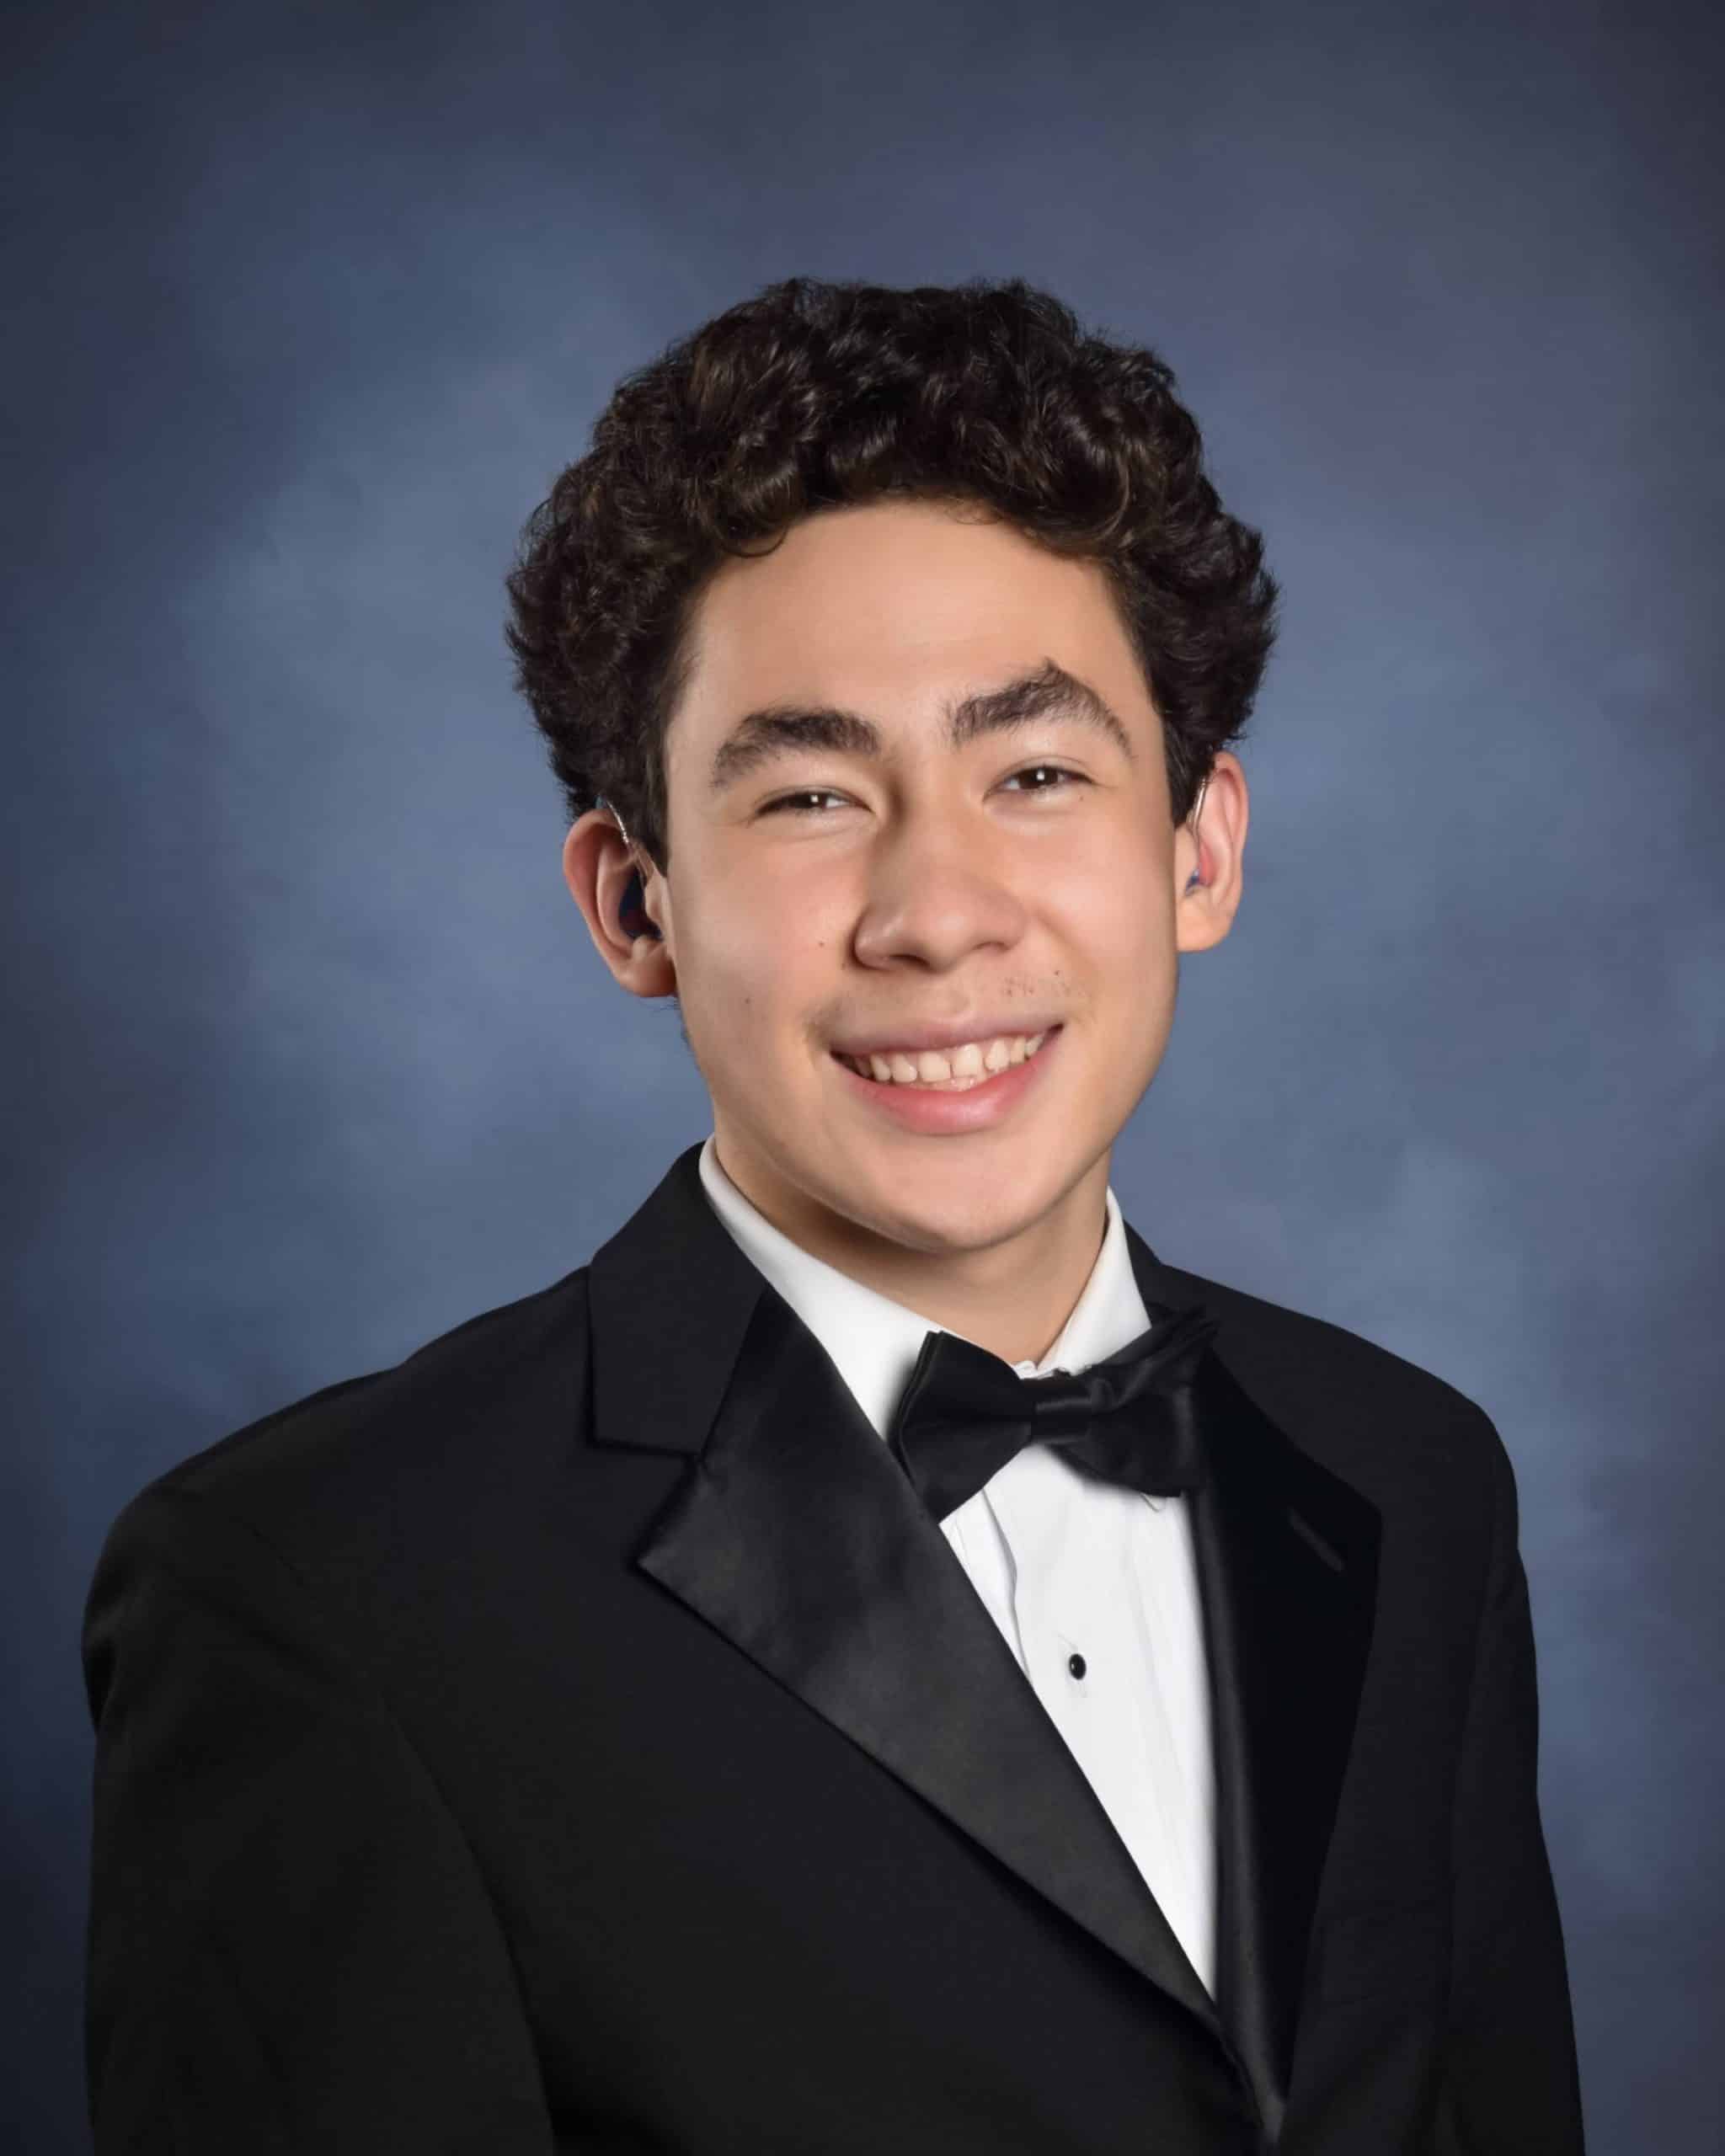 A graduation portrait of a white male in late teens. He has a thick black curly hair and wore a black tuxedo suit. He was beaming to the camera